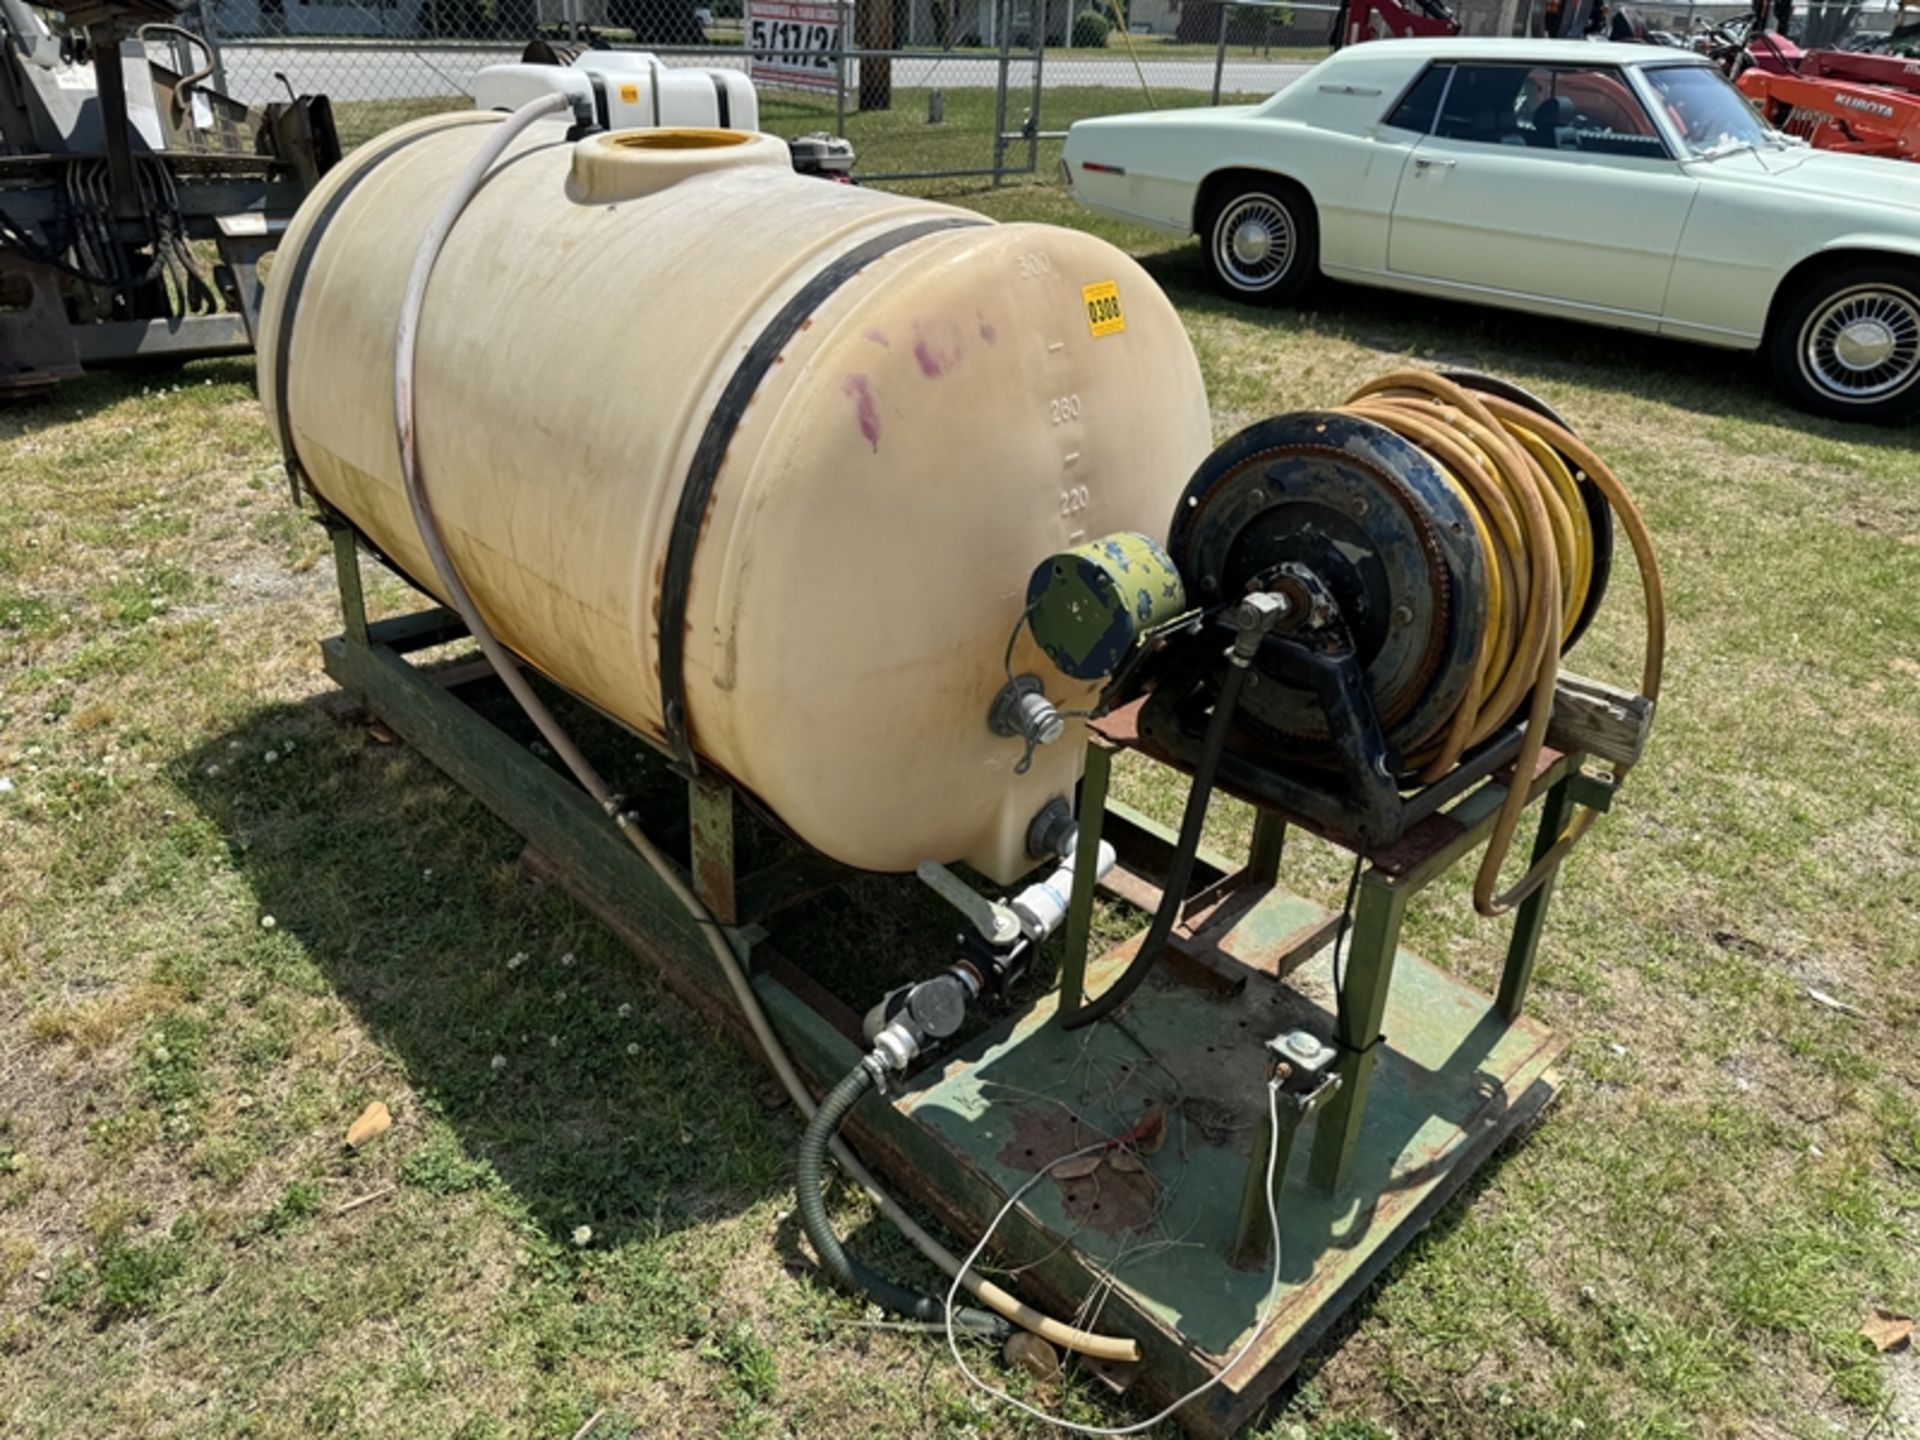 300 gallon tank with hhose and reel - Image 2 of 4